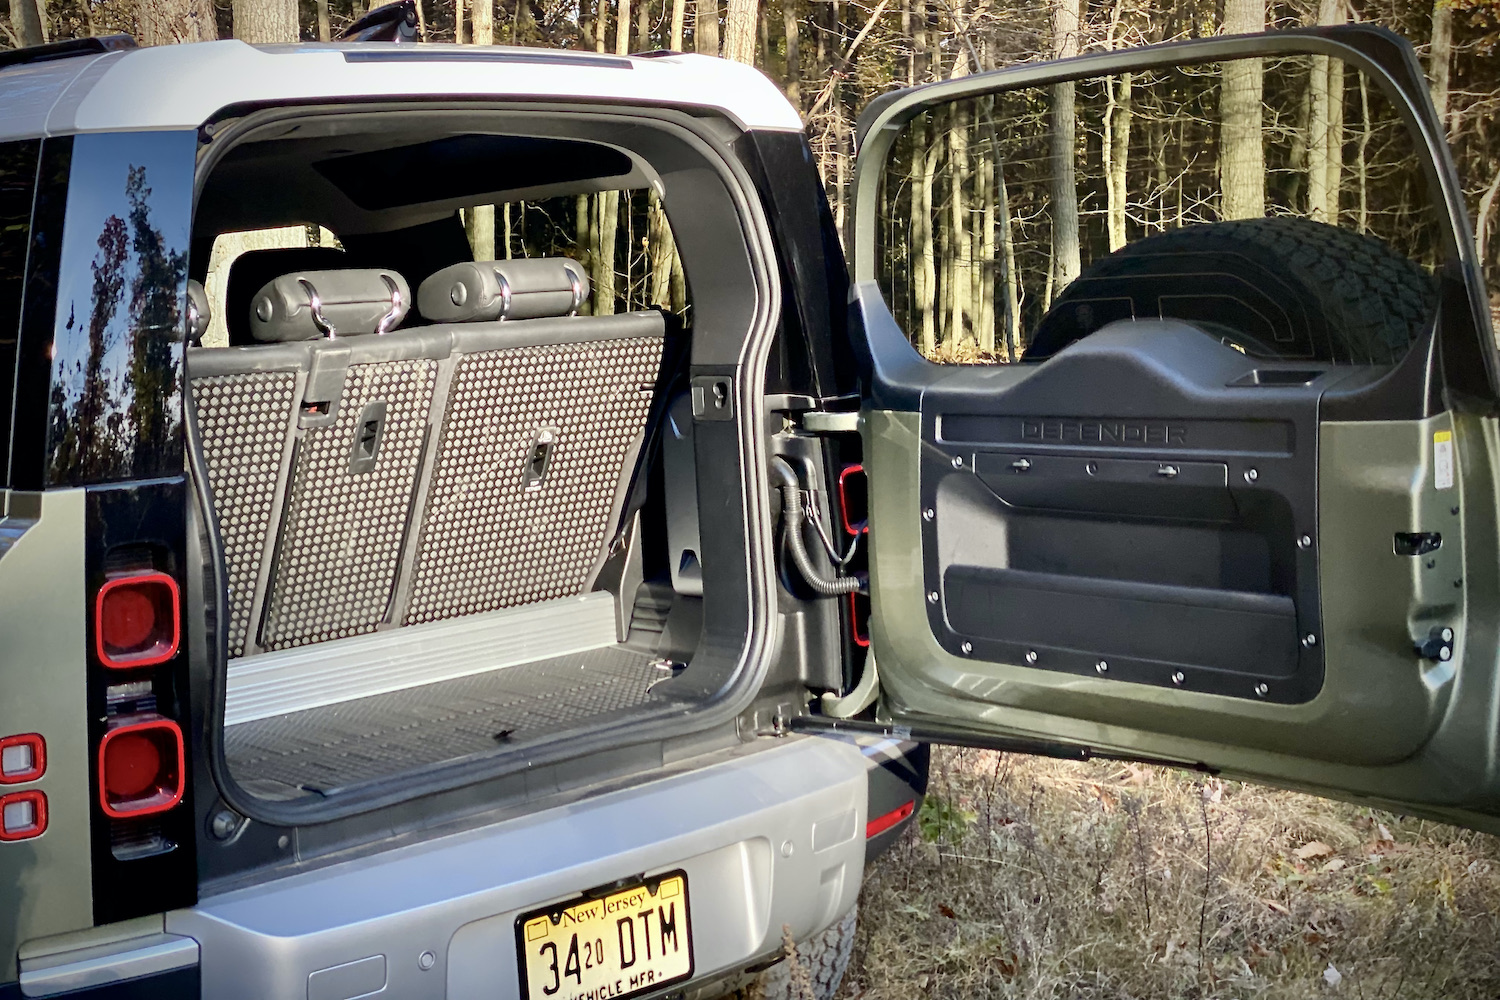 Close up of Land Rover Defender cargo area with swing-out liftgate.